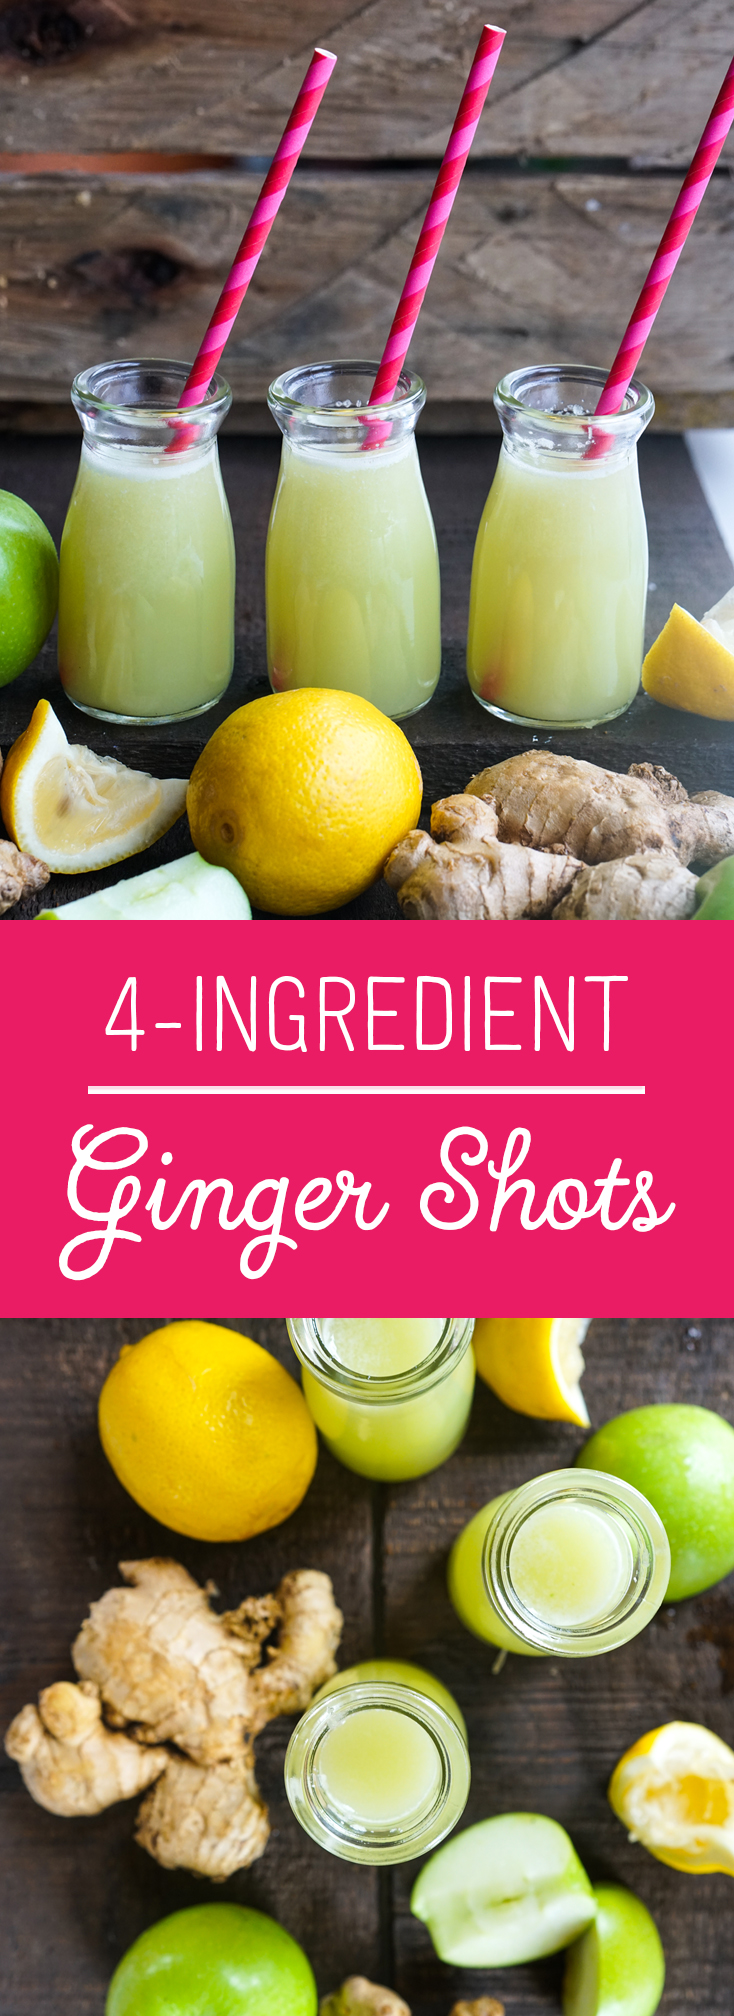 Healthy Ginger Shots to Help Prevent Flu